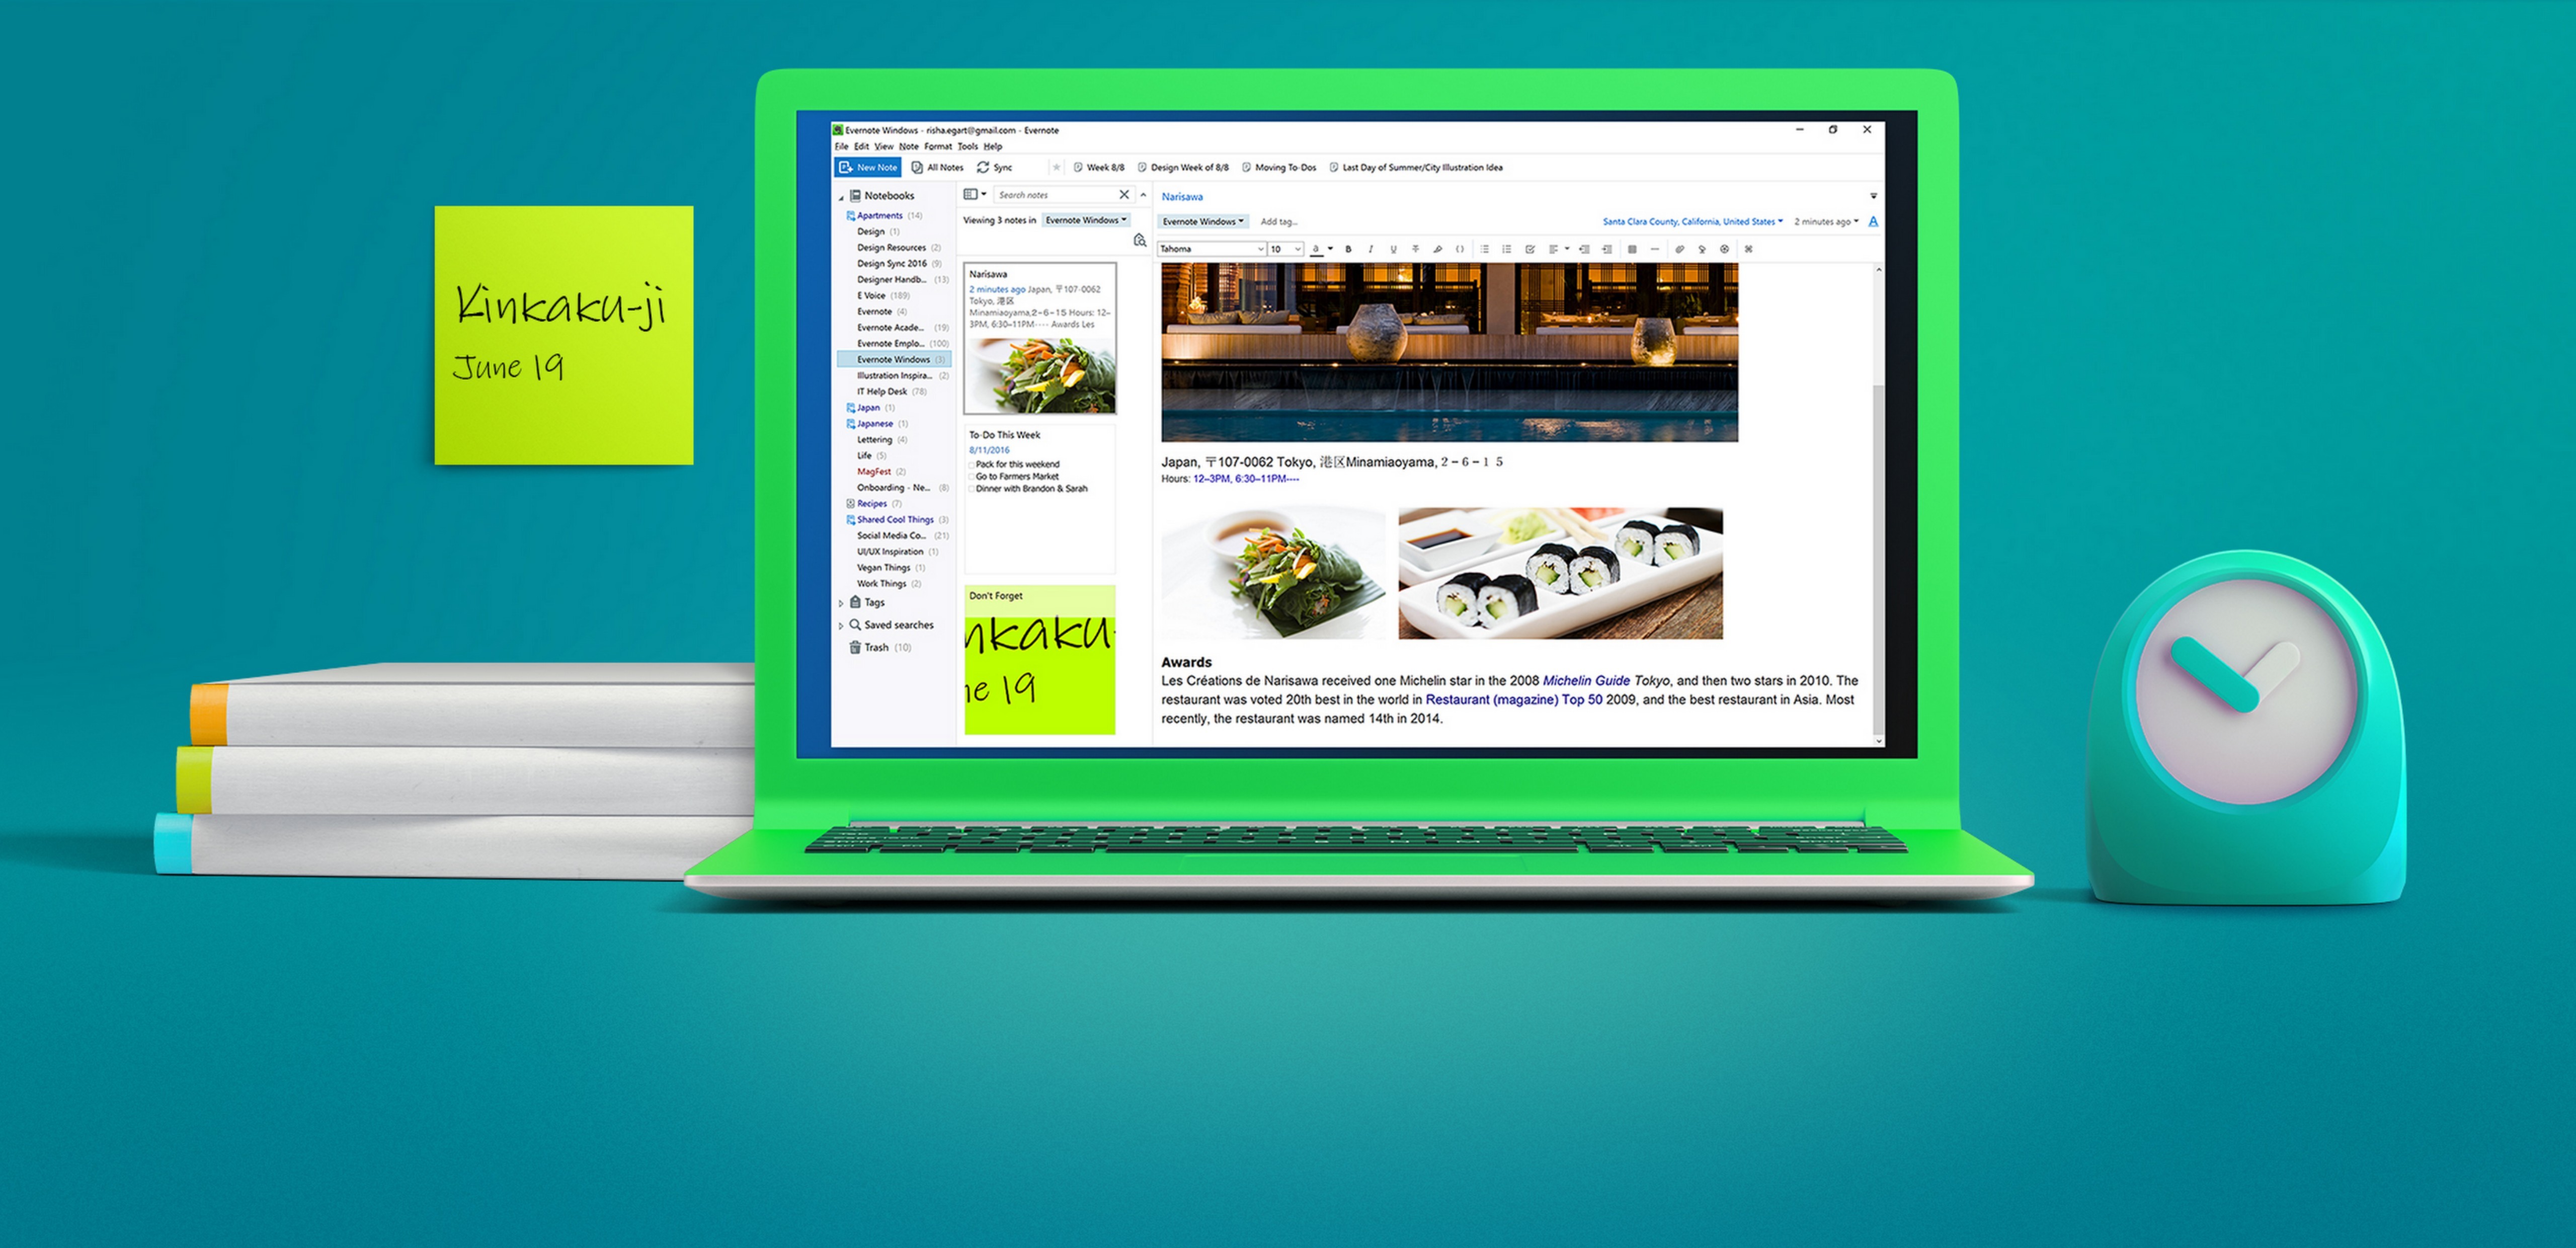 Evernote UWP in the Windows Store